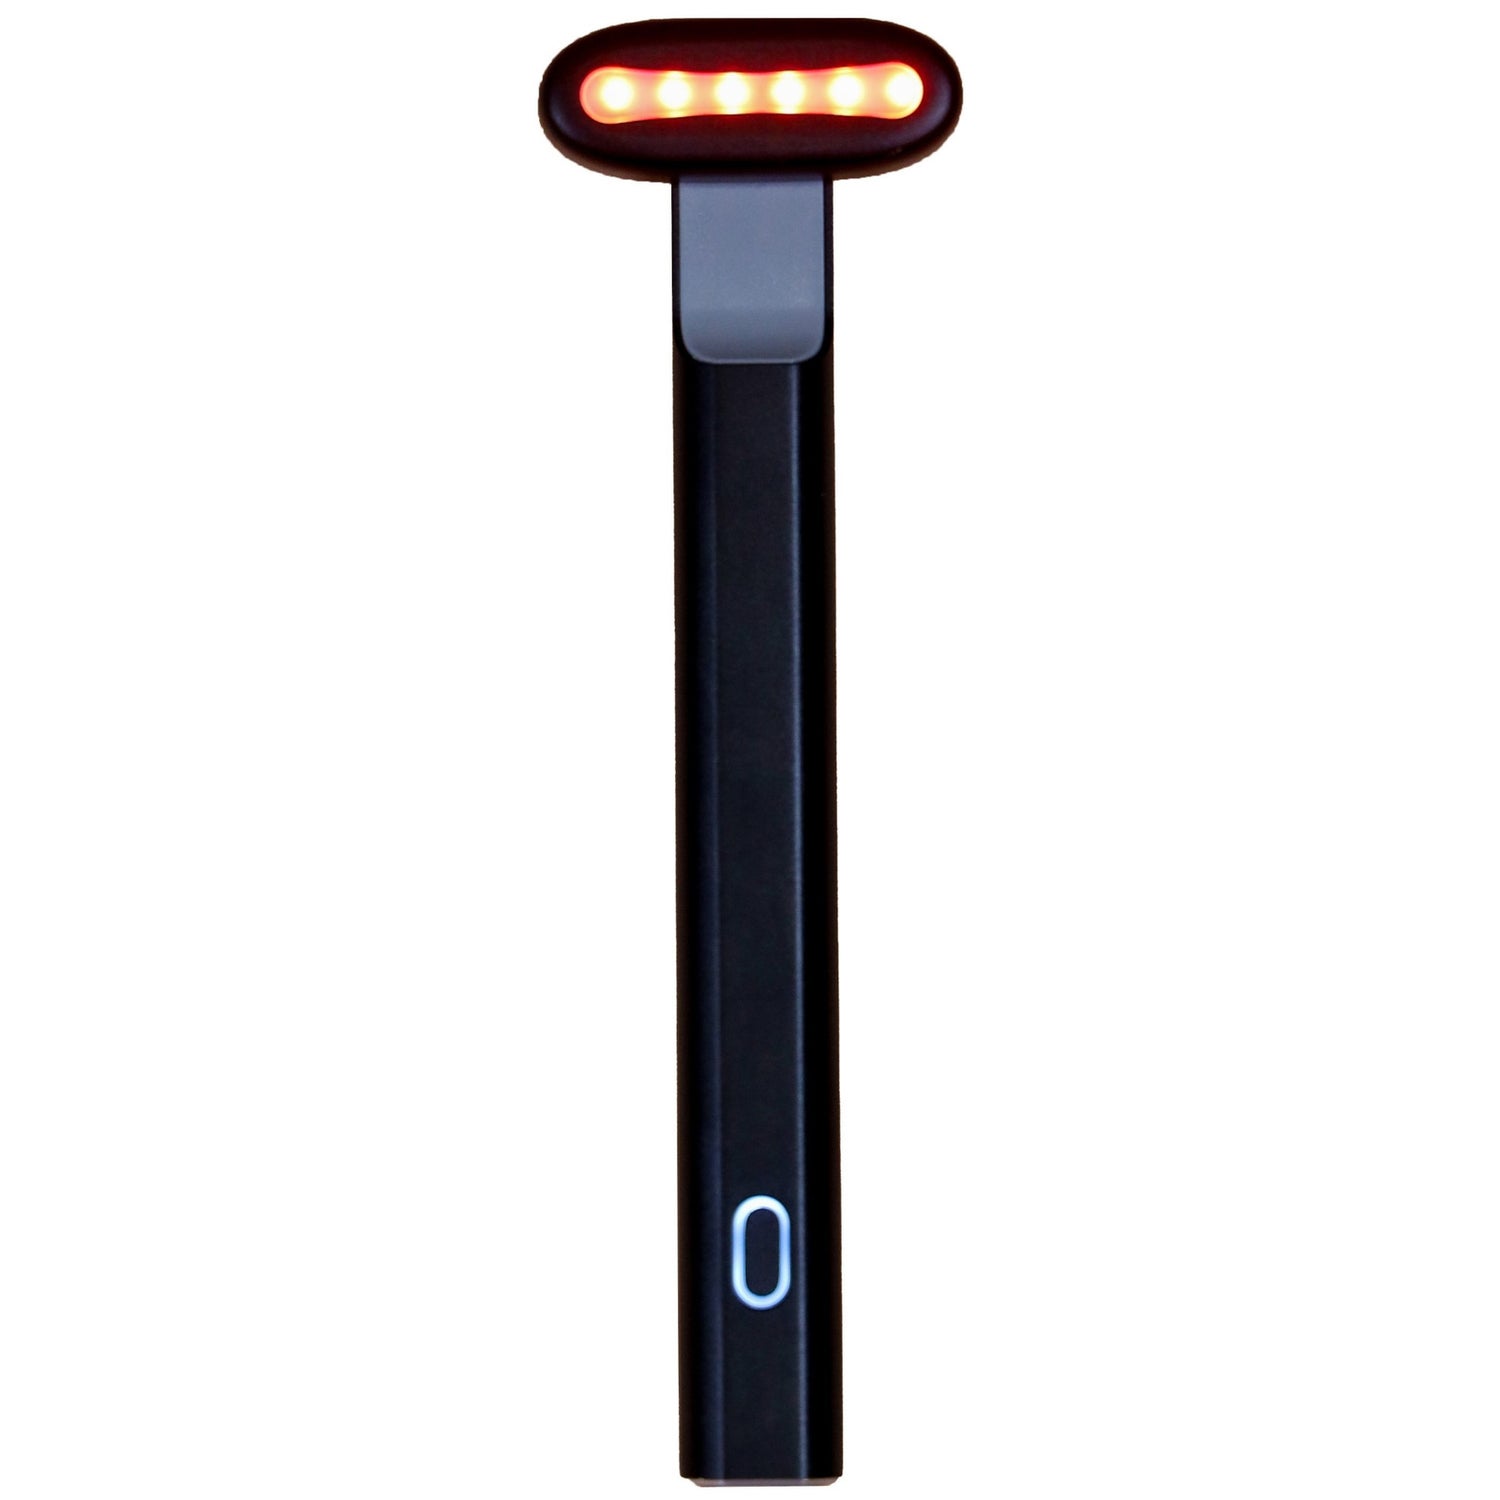 Lonvitalite Pro LED 5-1 Dual Red and Blue LED Light Therapy Facial Wand - Black